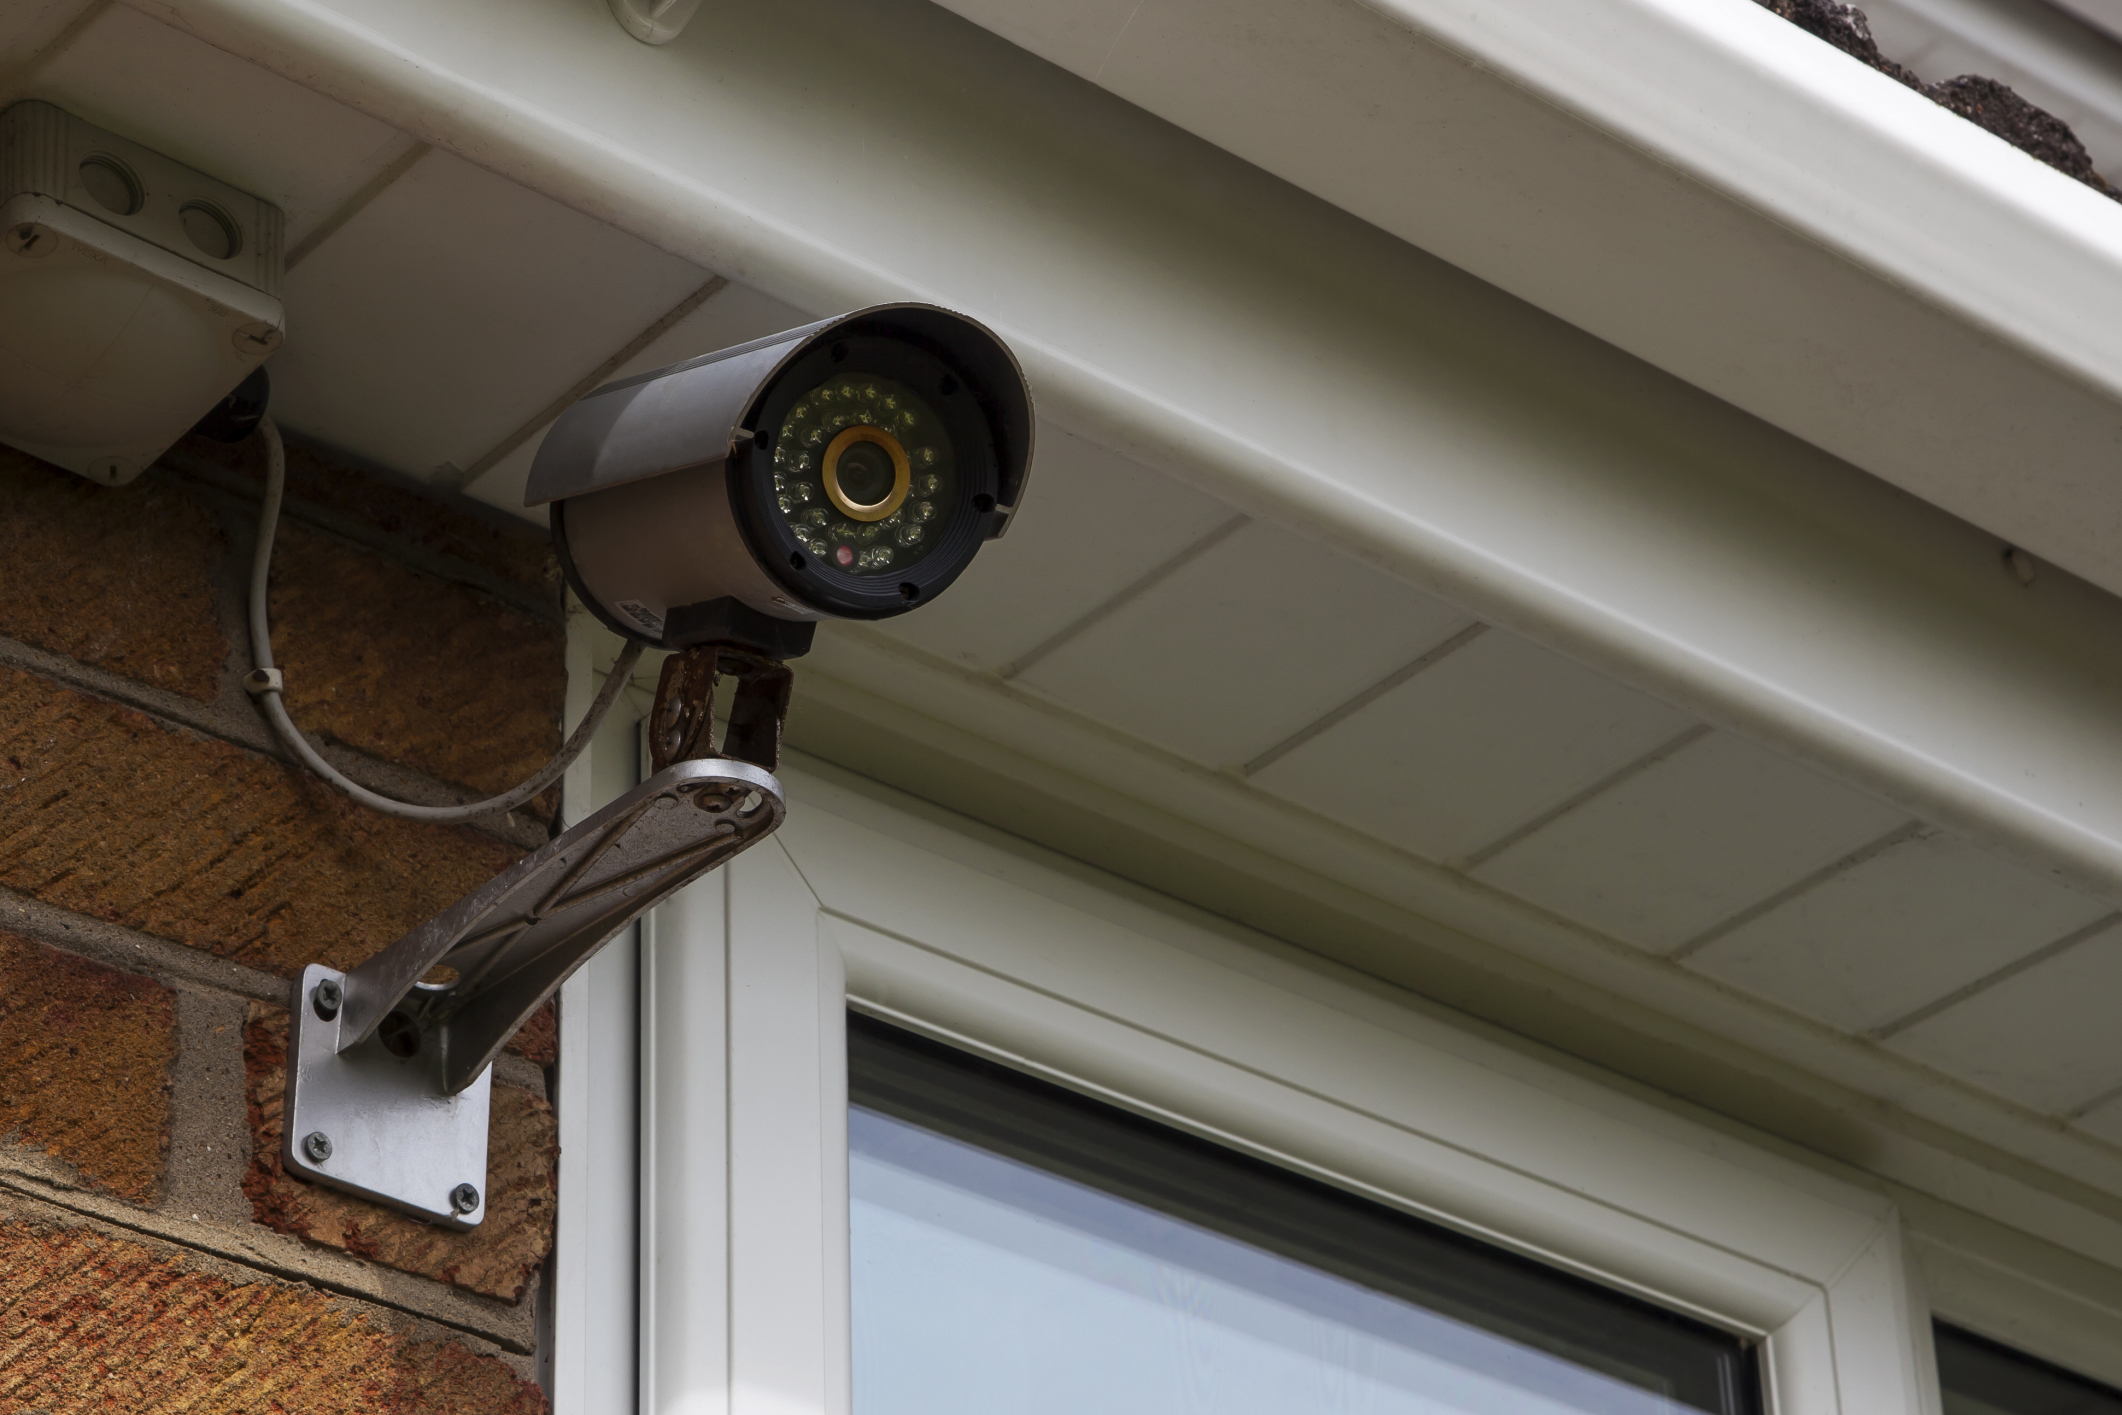 DC security camera incentive leaves poor behind